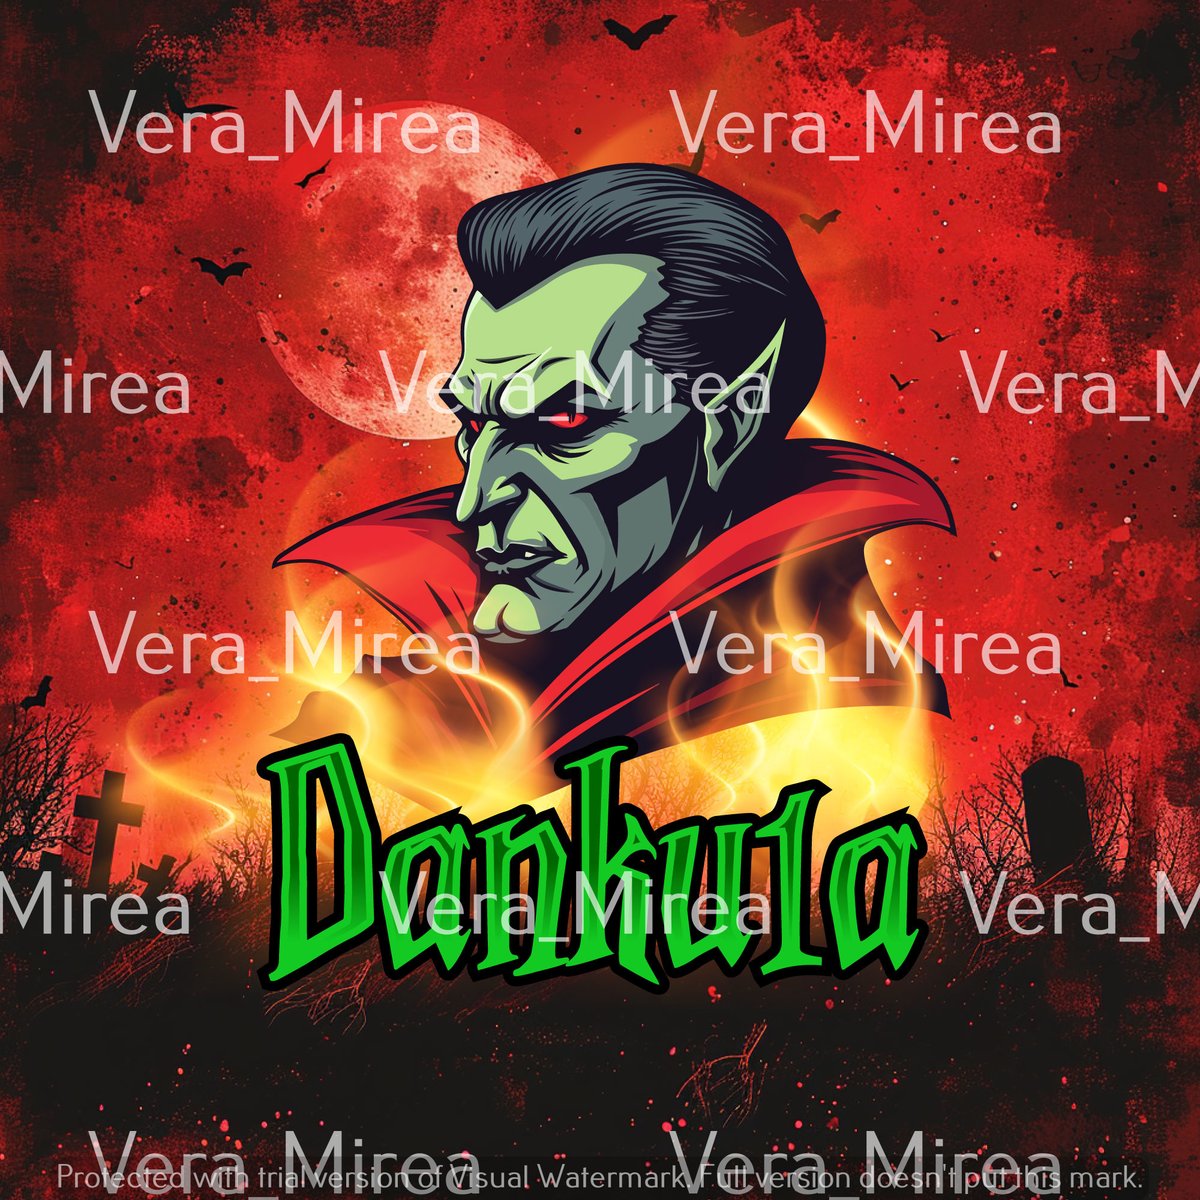 Client satisfied
Don't forget to say Hi!
twitch.tv/danku1a

#customized #Logo #panel  #emotes #logo #banner #overlay #VTuberEN #Twitch #smallstreamer #smallstreamerconnected #twitchtvgaming #twitchgirls #girlgaming #vtuber #SupportSmallStreamers #Twitchtvgaming